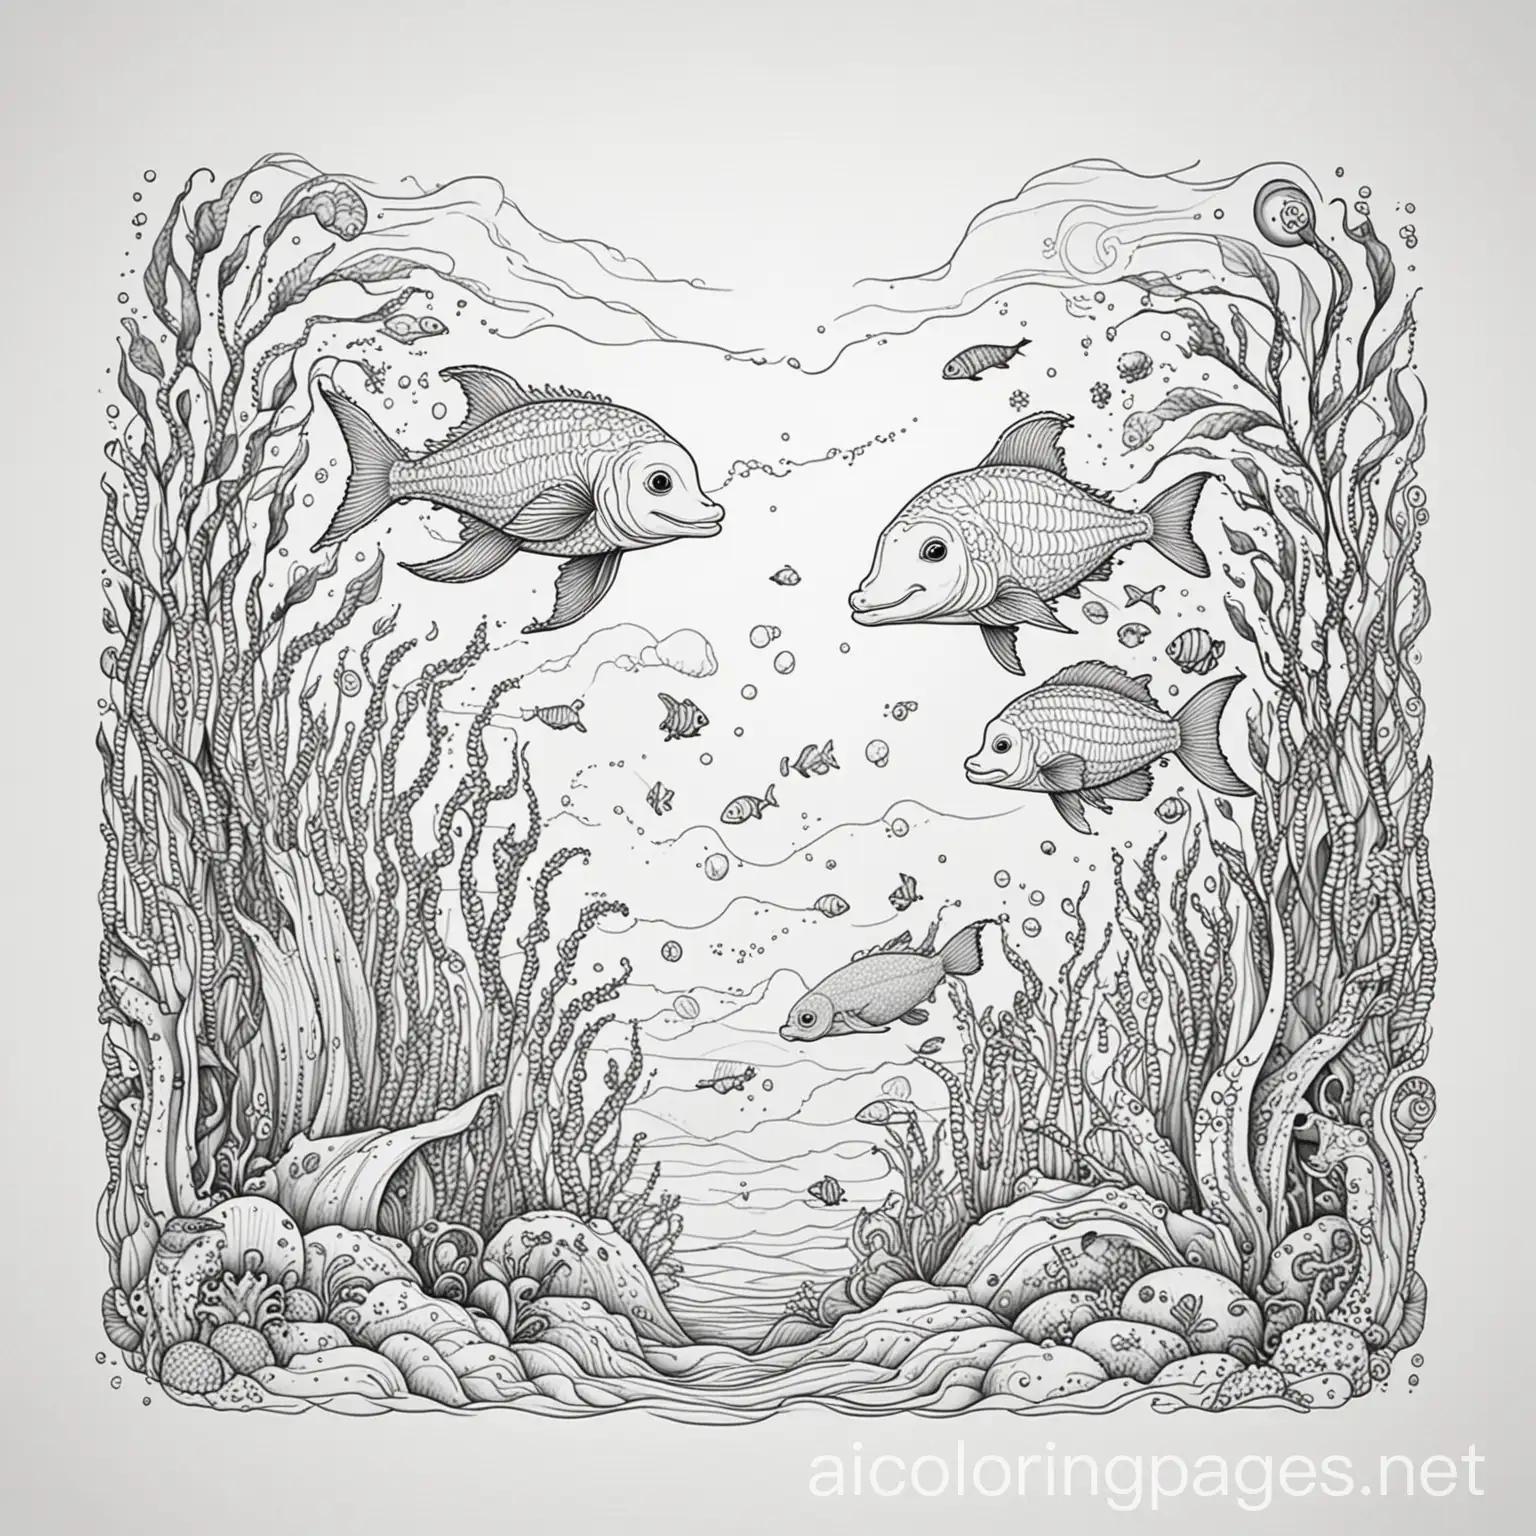 mystical sea animals, Coloring Page, black and white, line art, white background, Simplicity, Ample White Space. The background of the coloring page is plain white to make it easy for young children to color within the lines. The outlines of all the subjects are easy to distinguish, making it simple for kids to color without too much difficulty